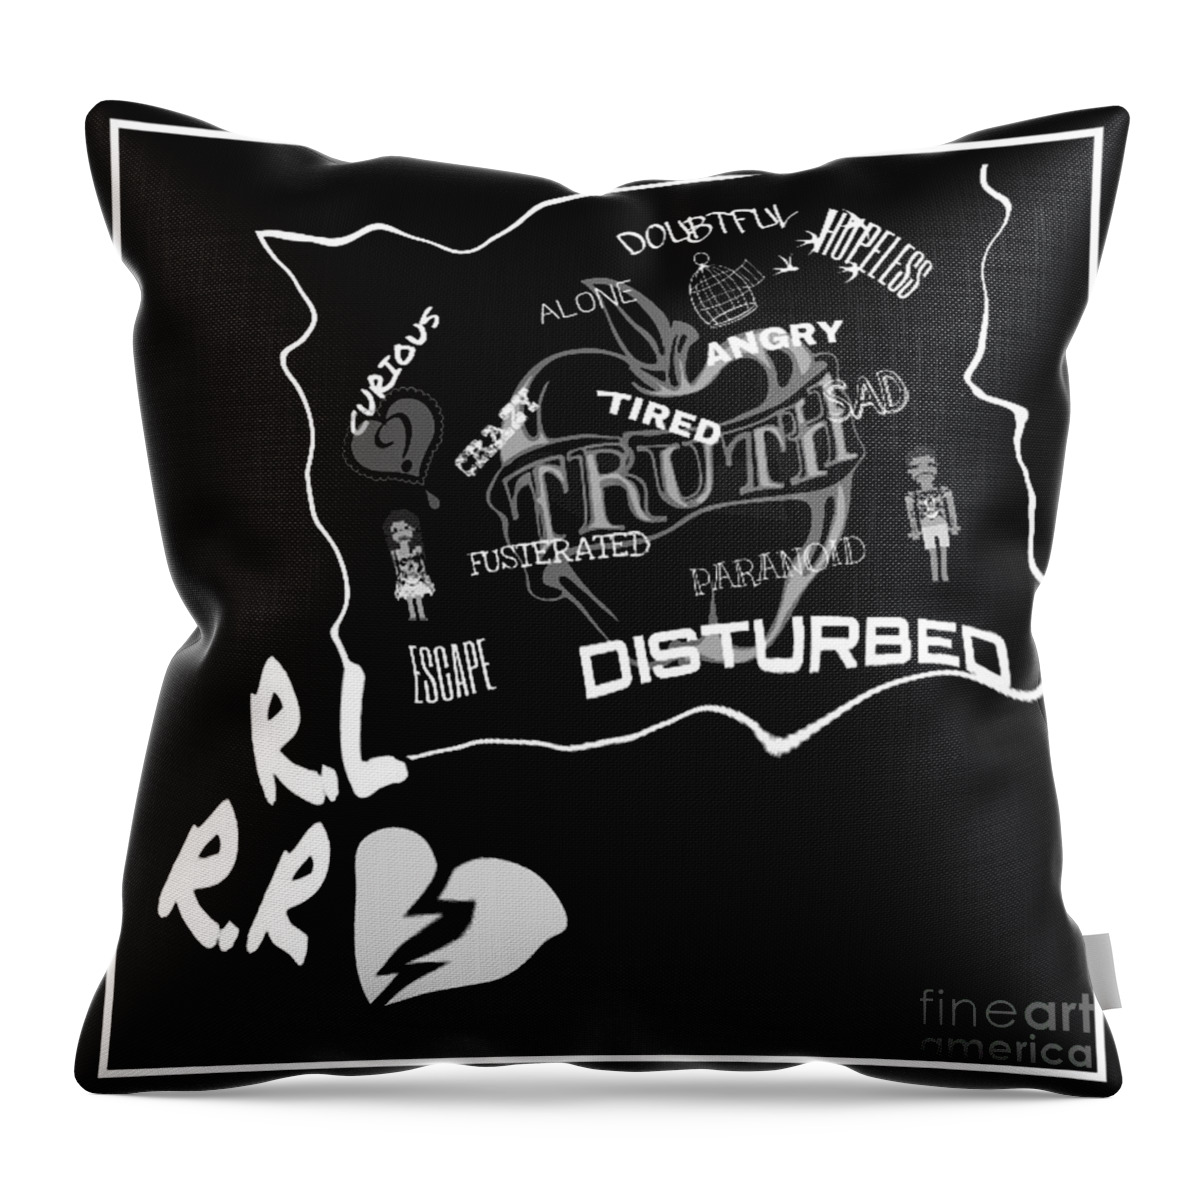  Throw Pillow featuring the digital art Ambiguous by Rindi Rehs